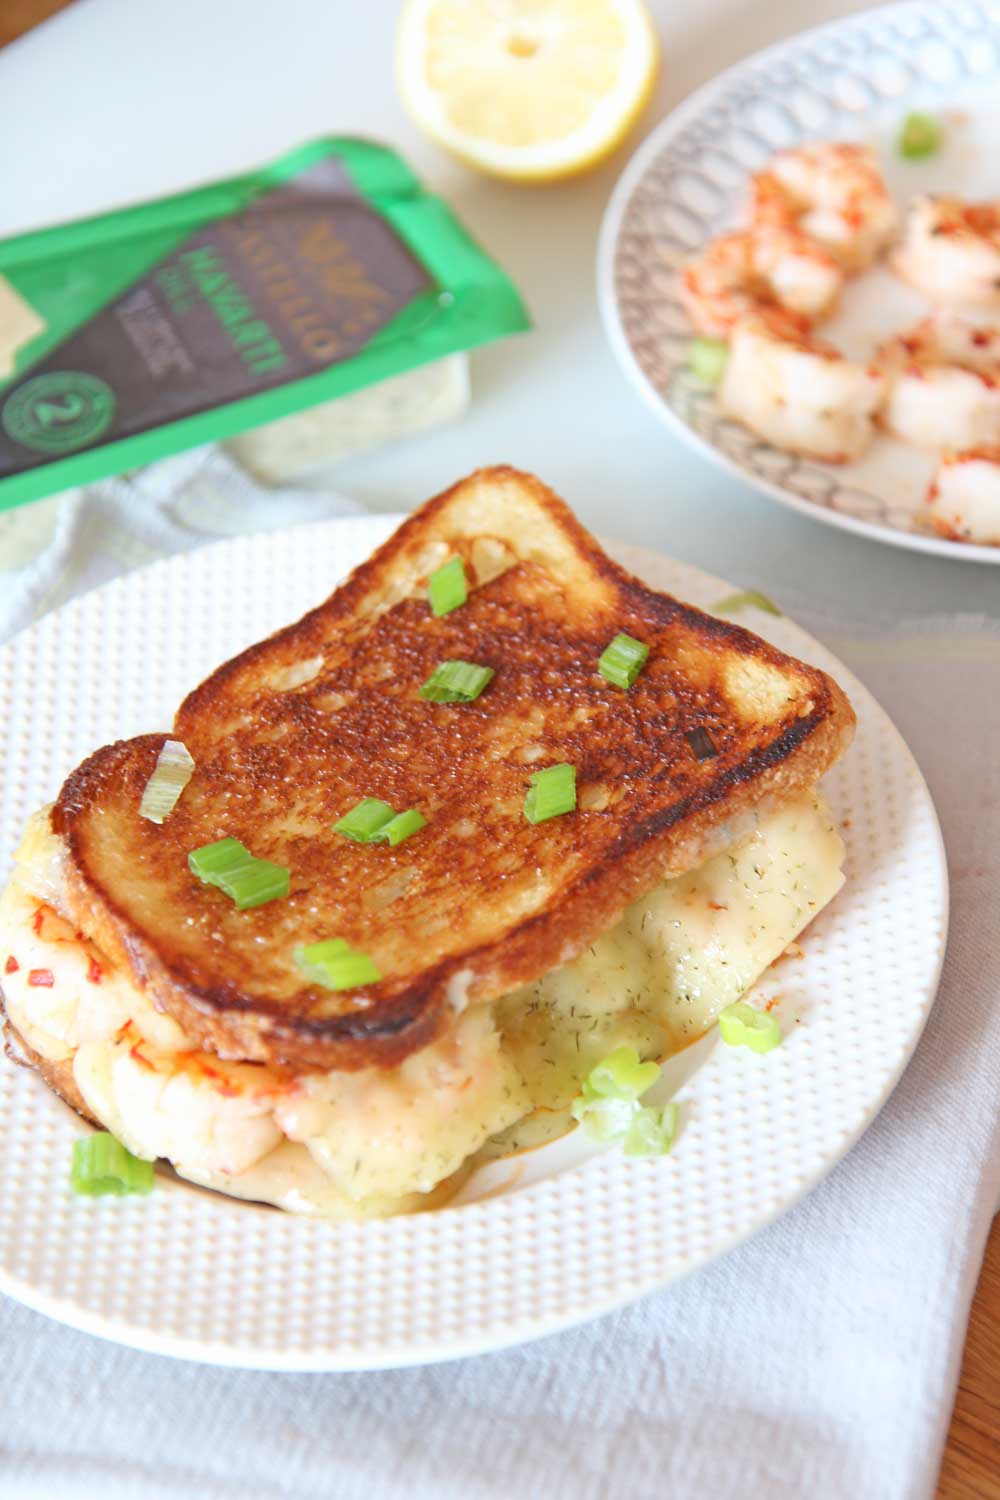 Shrimp and Dill Havarti Grilled Cheese Recipe. Bread, Castello Dill Havarti, mayo, lemon and scallions are all you need. This is a fast crunchy cheesy comfort food delight for a happy dinner. Happy Grilled Cheese Eating! www.ChopHappy.com #Ad #CastelloCheese #GrilledCheese